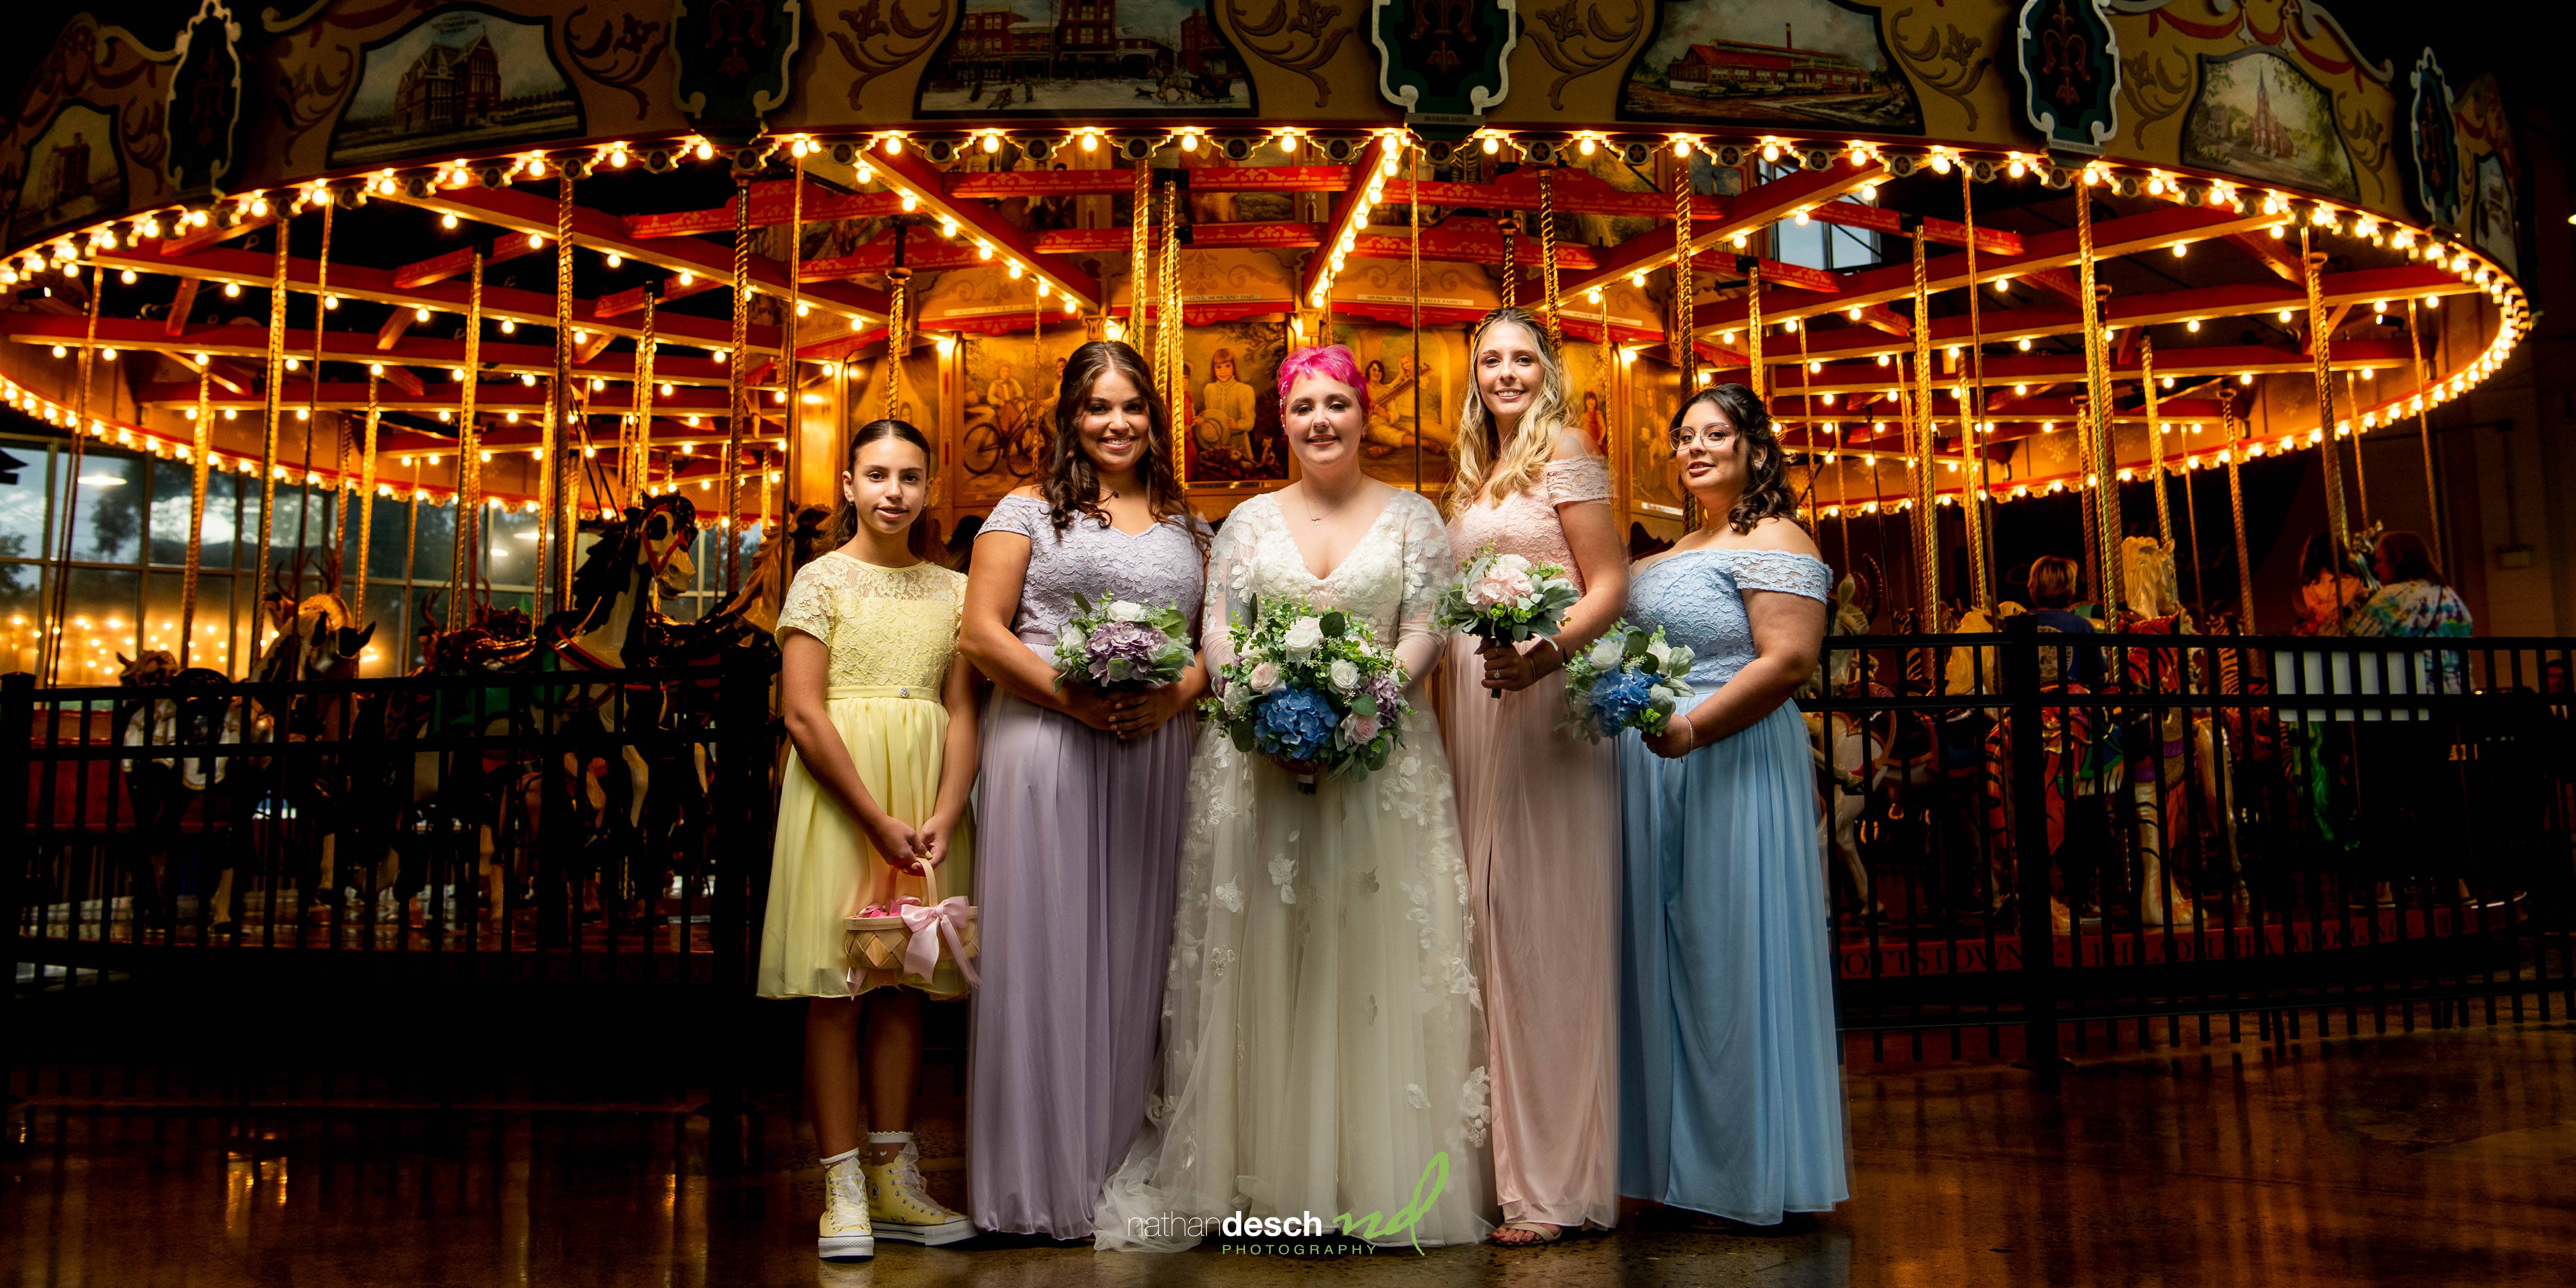 epic picture of bride and bridesmaids